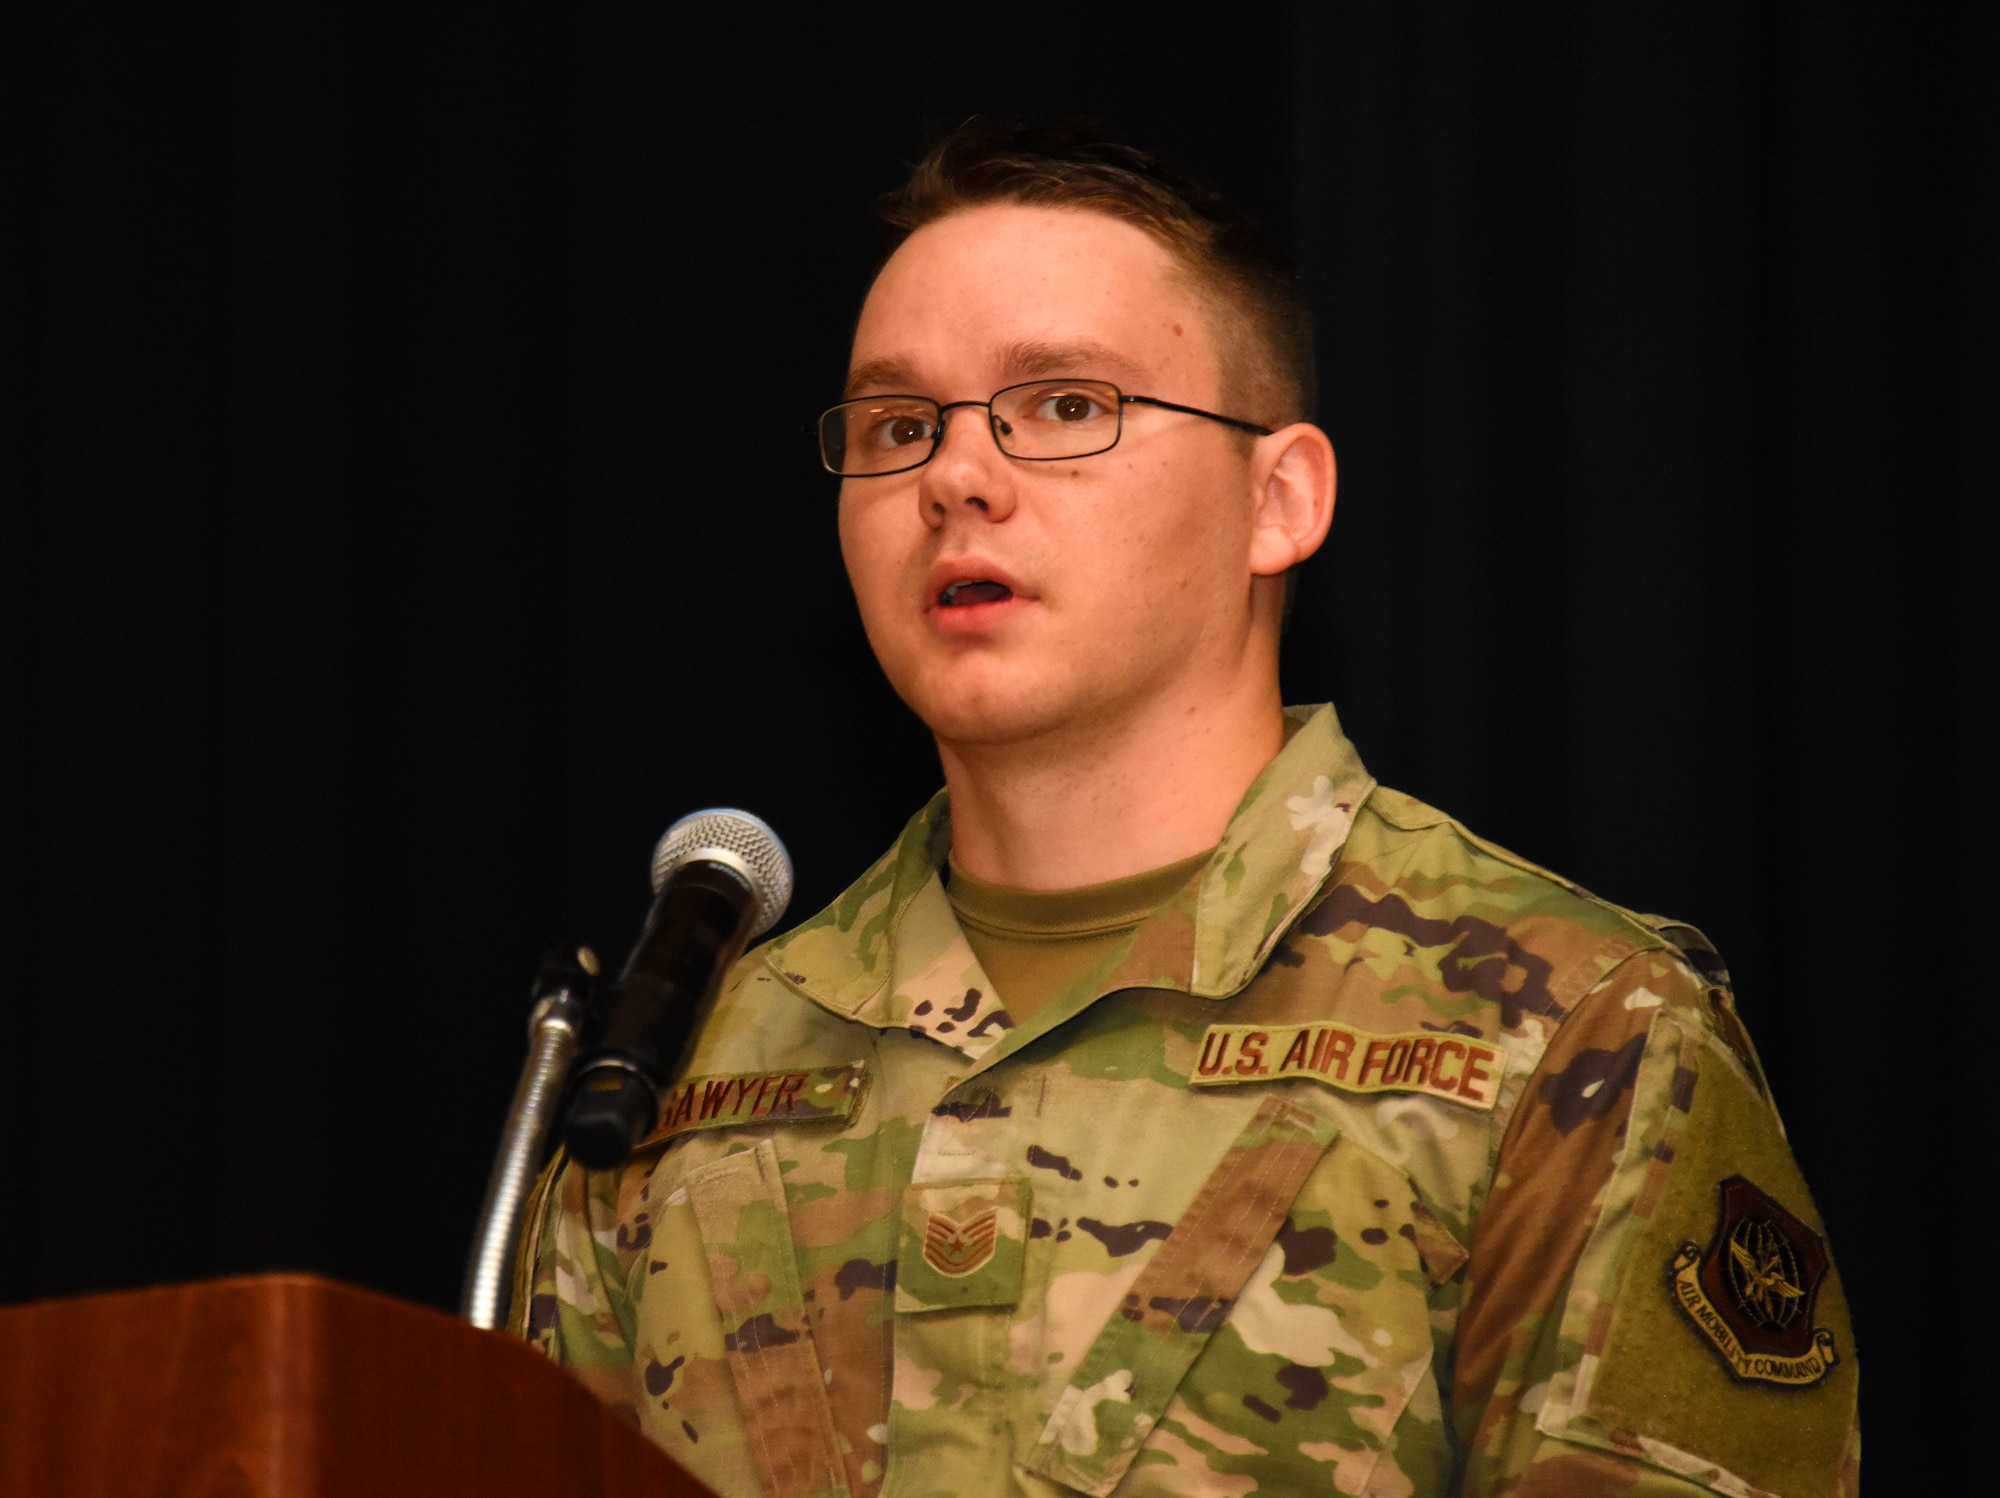 U.S. Air Force Tech Sgt. Shane Sawyer, 305th Maintenance Group Quality Assurance Inspector, talks to Airmen at the symposium.